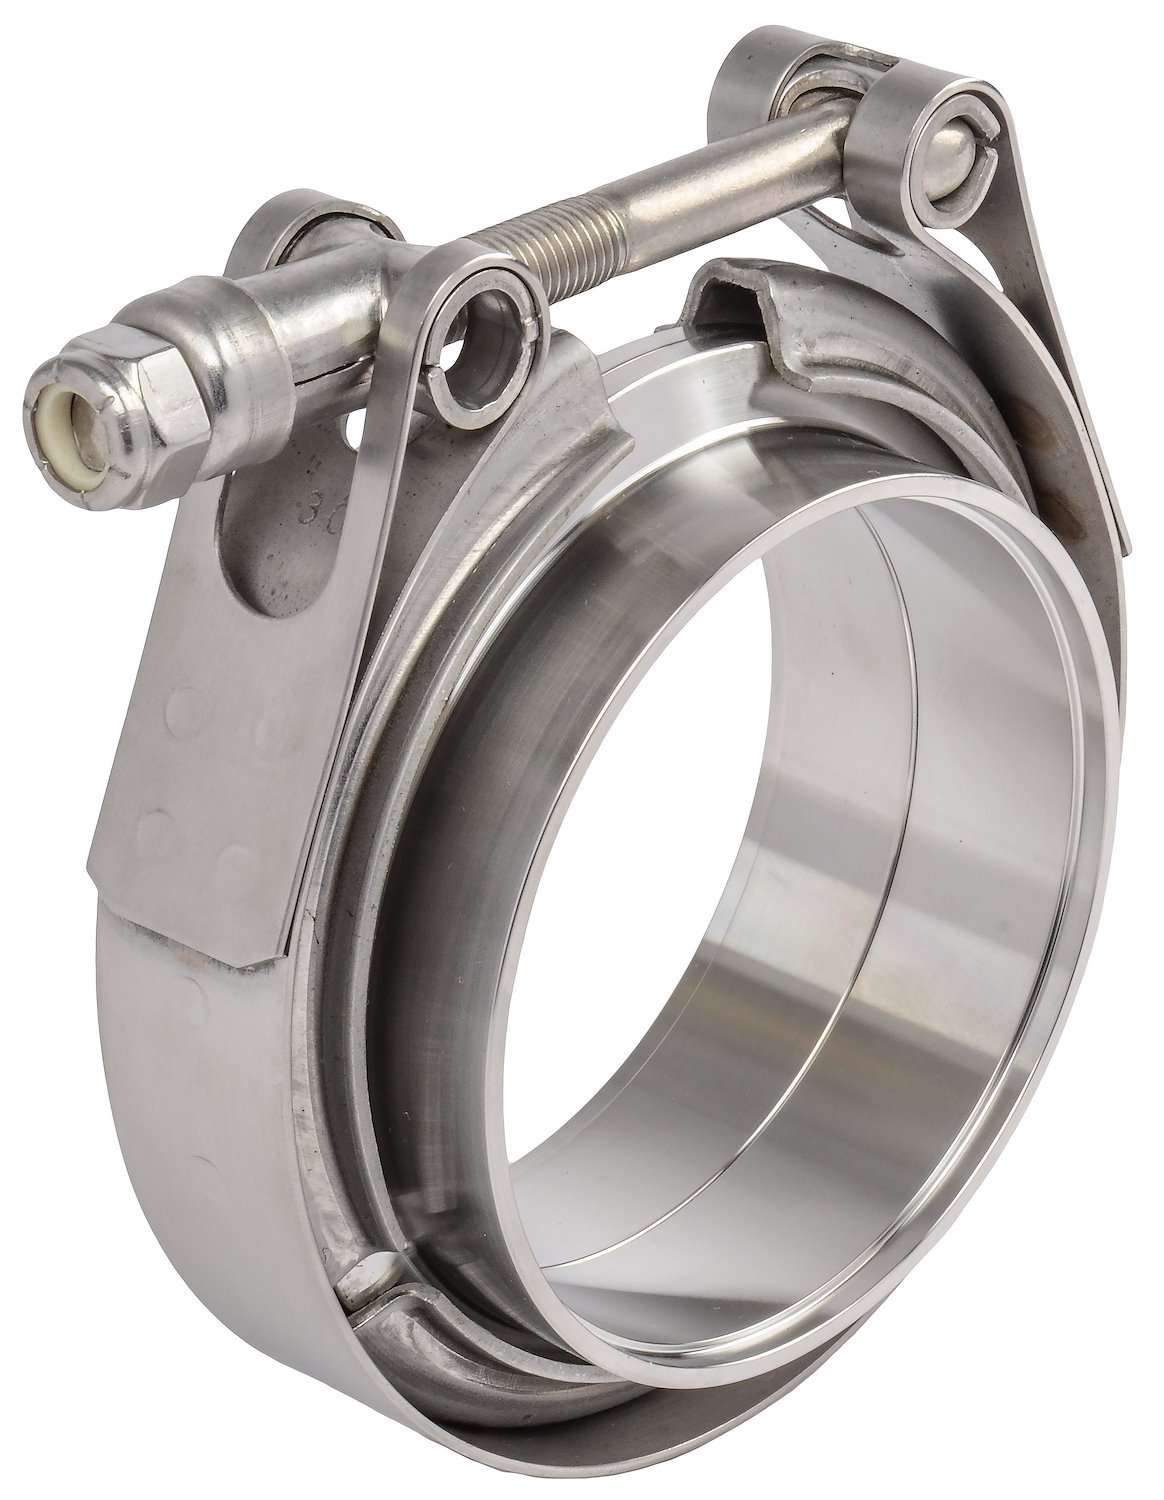 300-Series Stainless Steel Hose Clamps (10-Pack)